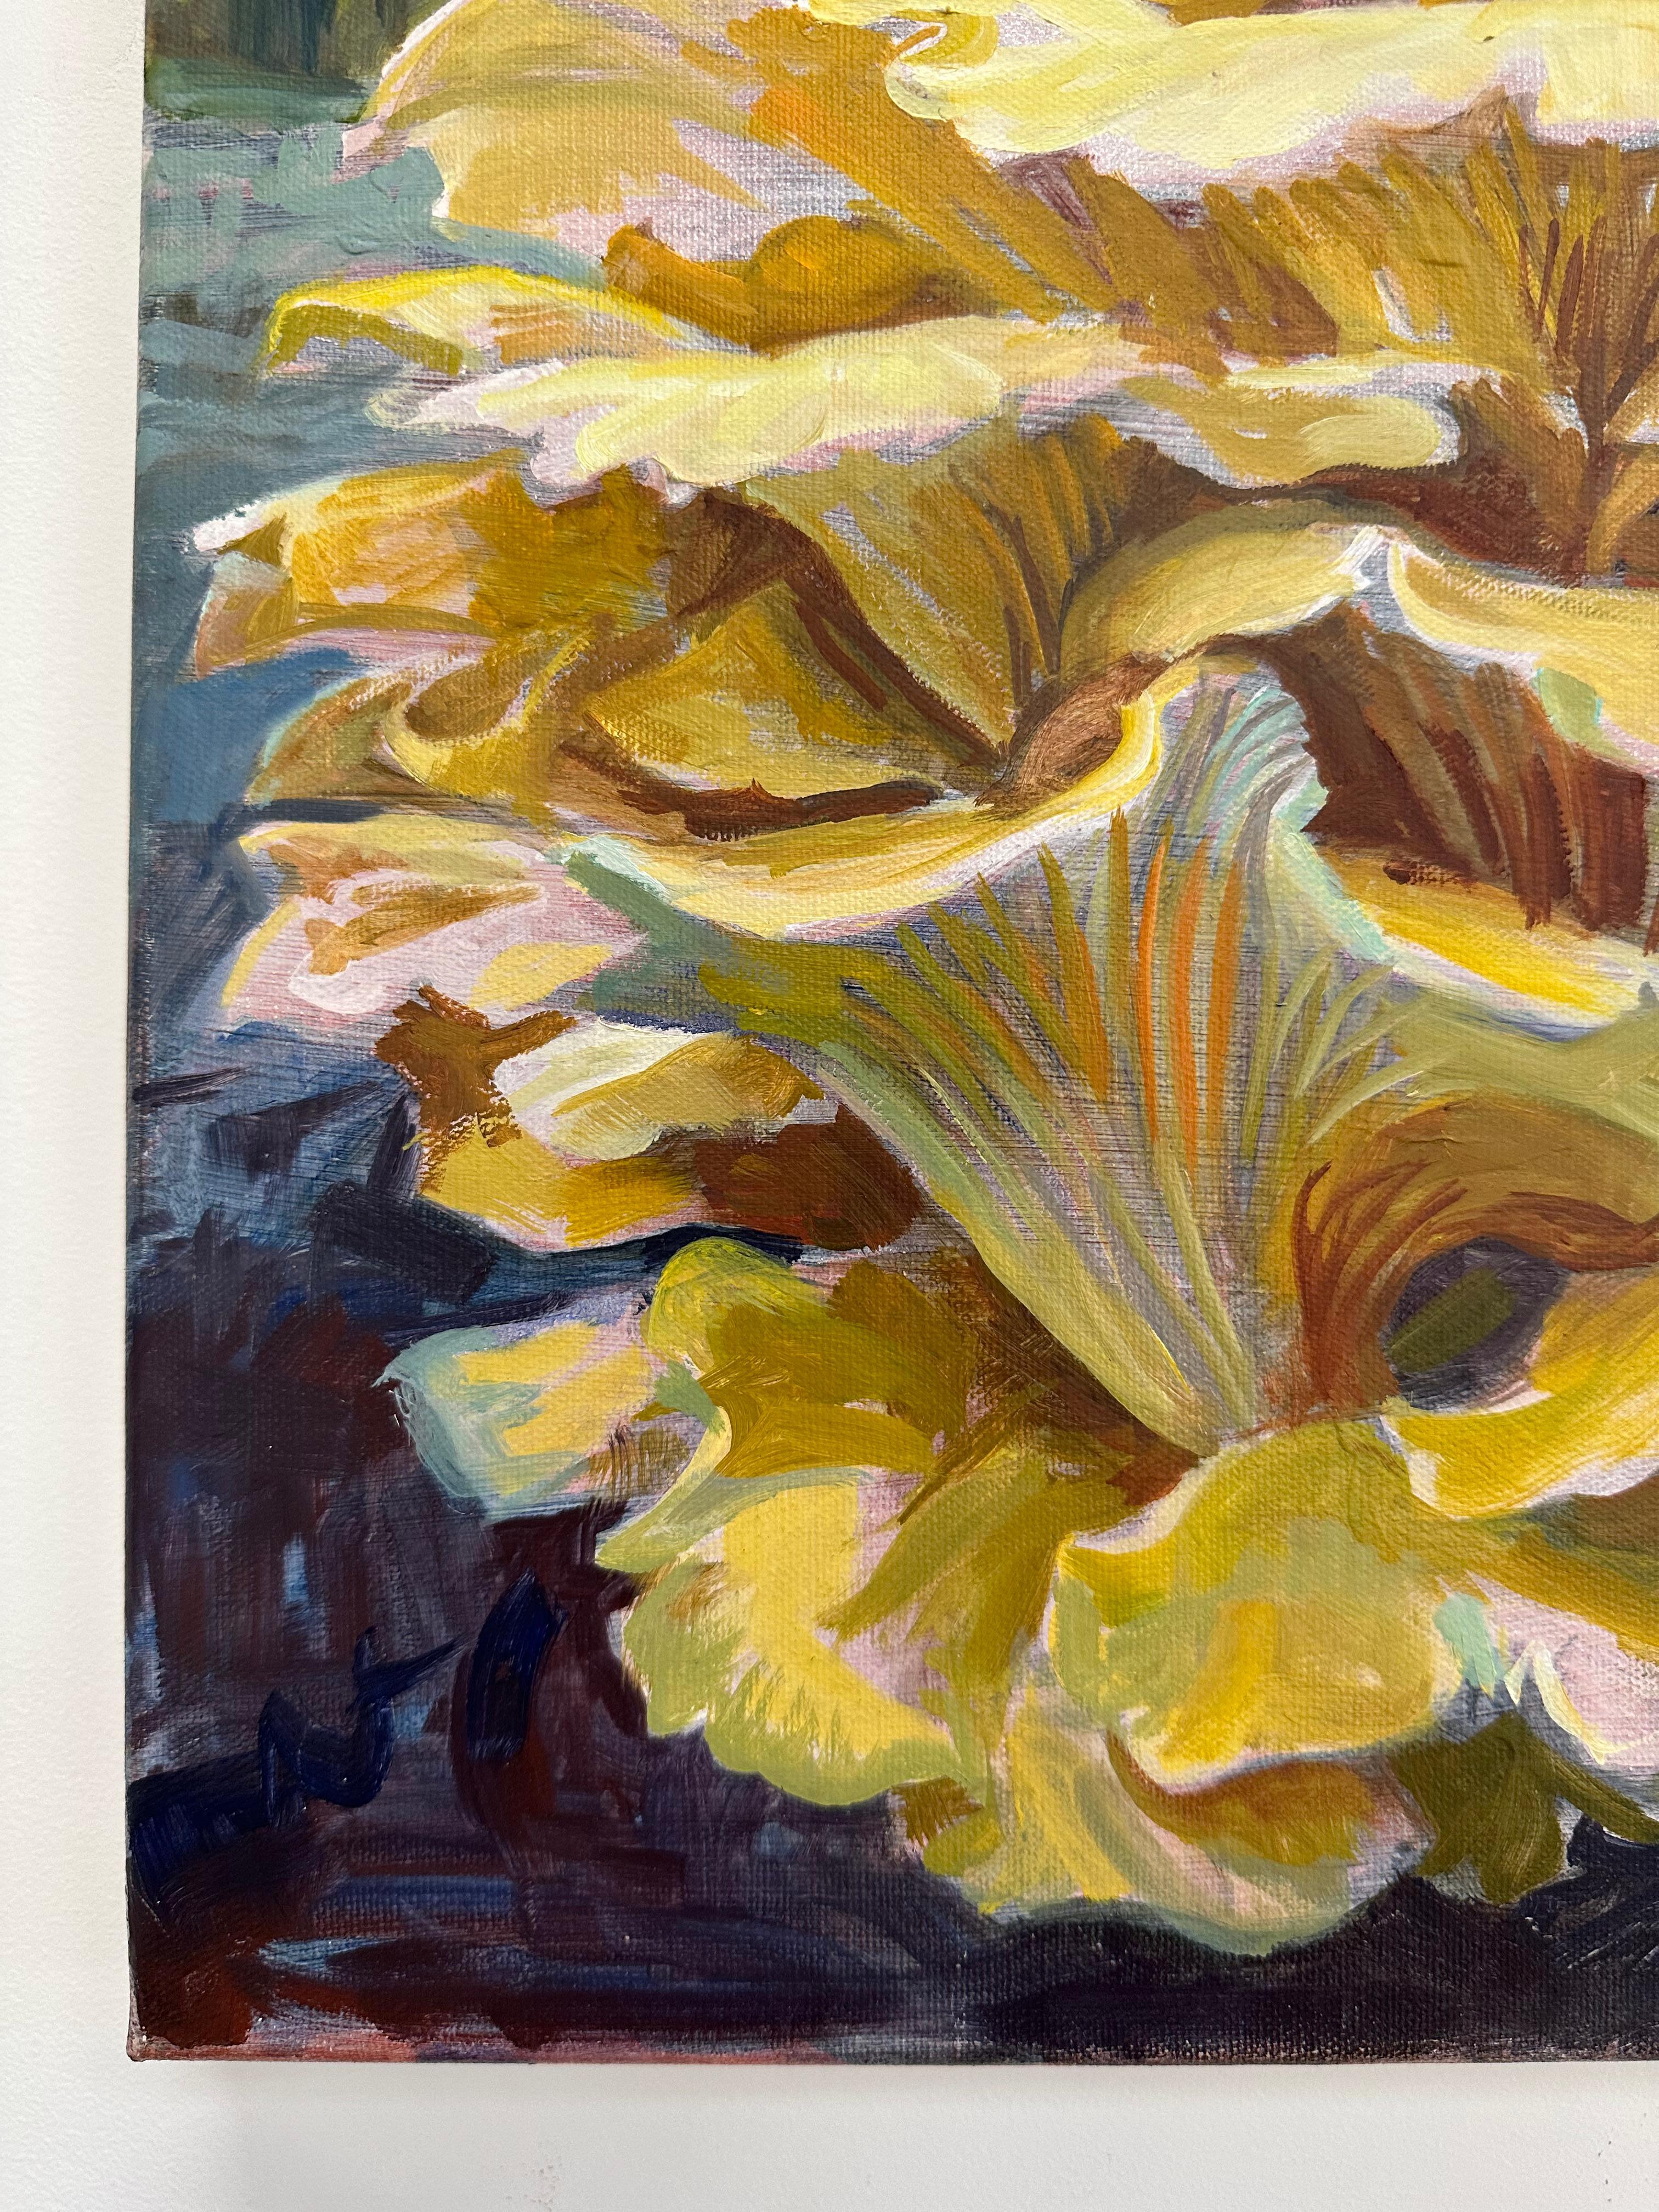 A golden oyster mushroom in hues of yellow, ochre and orange is masterfully painted, arranged in a dynamic, asymmetrical composition, luminous against a dark violet and green background. Signed, dated and titled on verso.

Andrea Kantrowitz invites